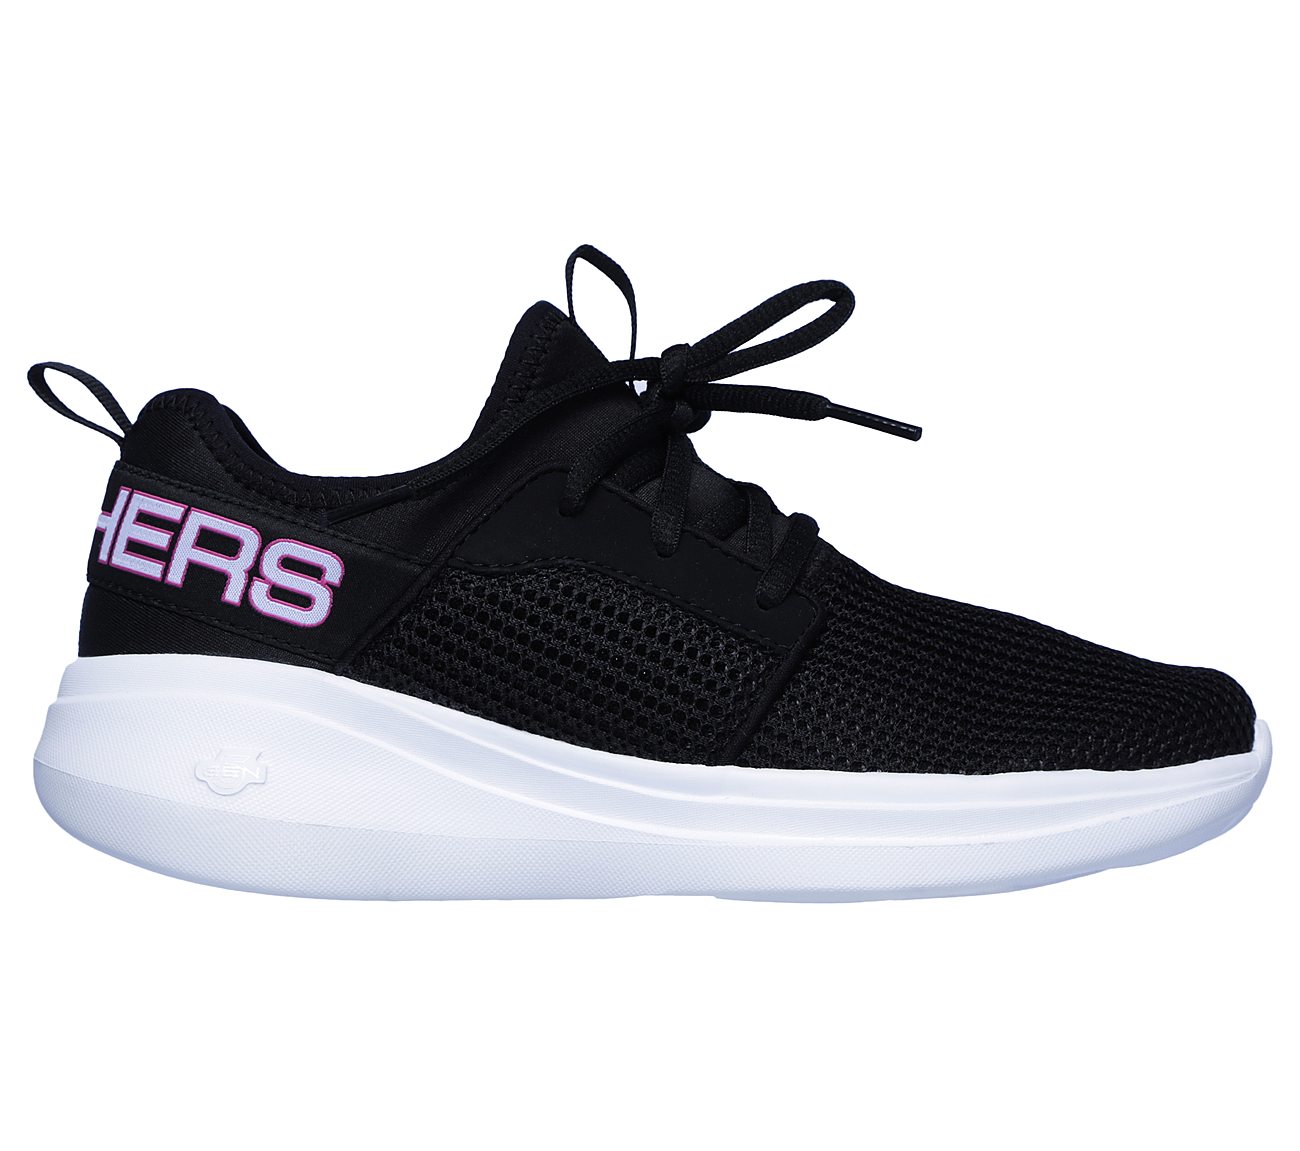 GO RUN FAST-VALOR, BLACK/PINK Footwear Right View